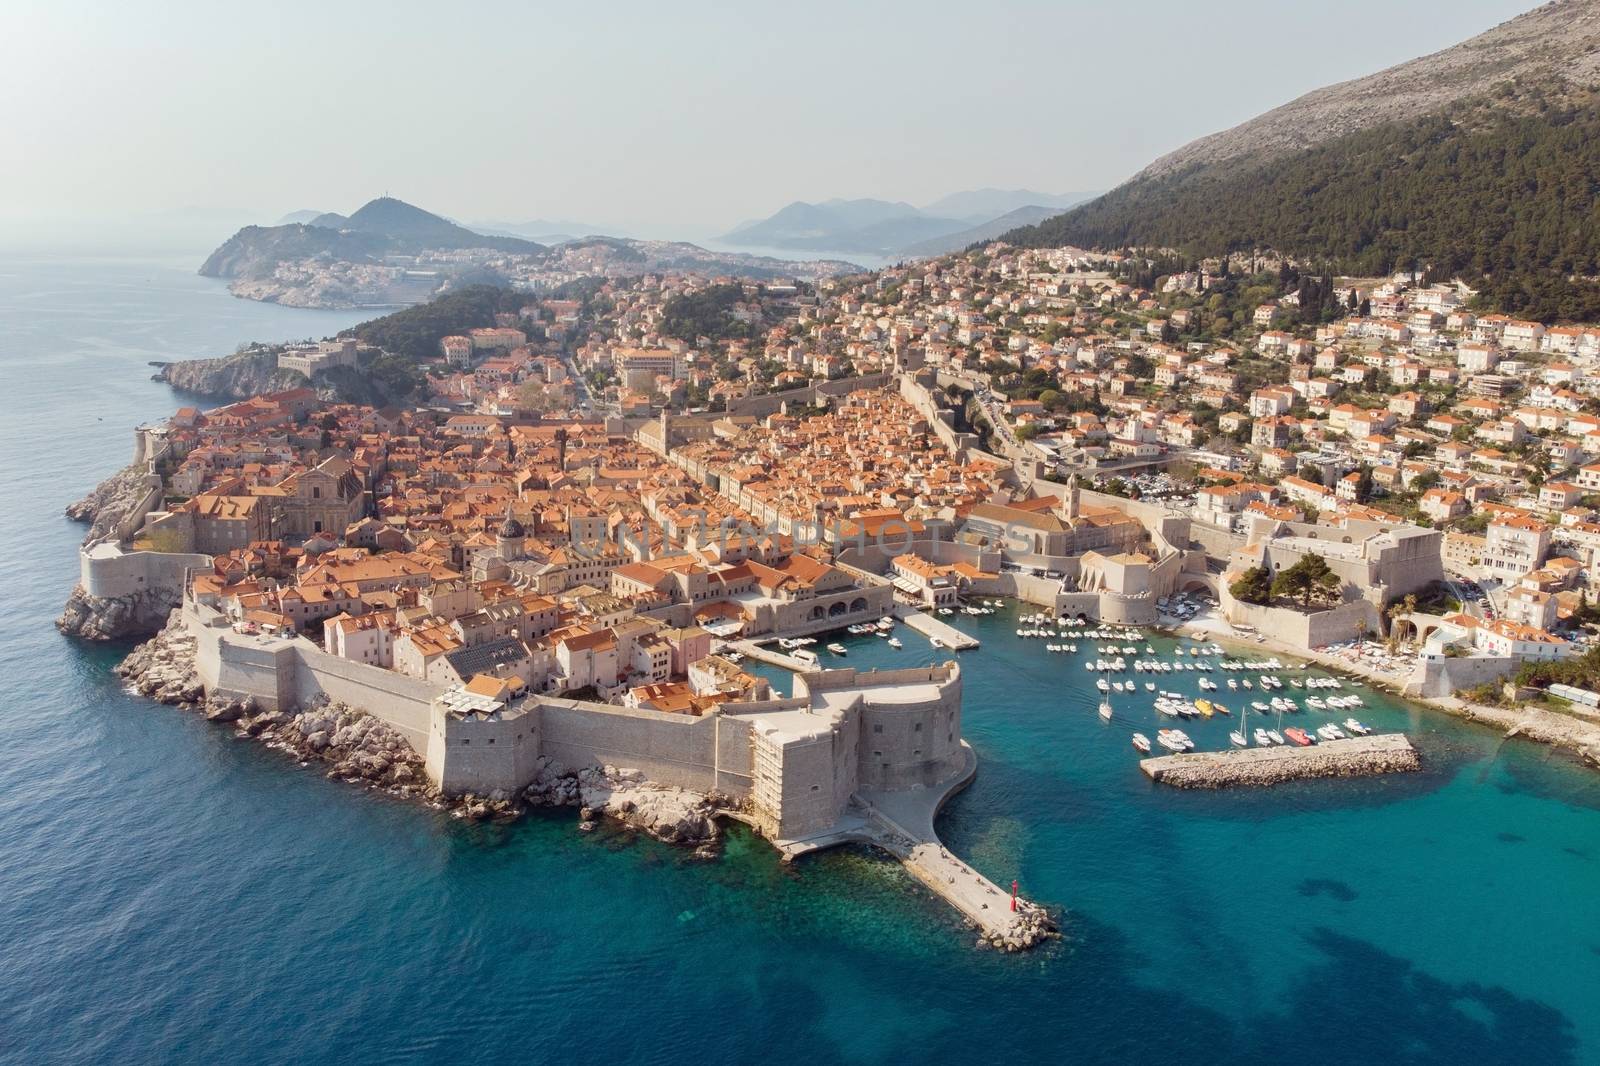 Aerial viel of the old town of Dubrovnik, Croatia by Charnsitr